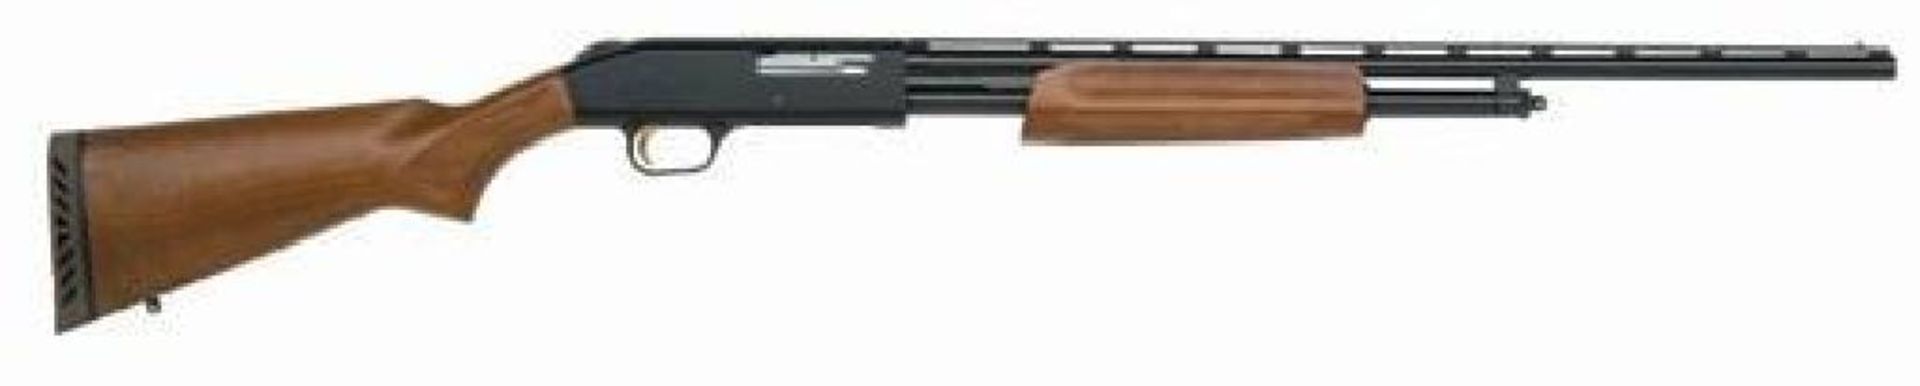 MB50104 PRODUCT DETAILS FAMILY:500 Series MODEL:500 All-Purpose Field TYPE:Shotgun ACTION:Pump